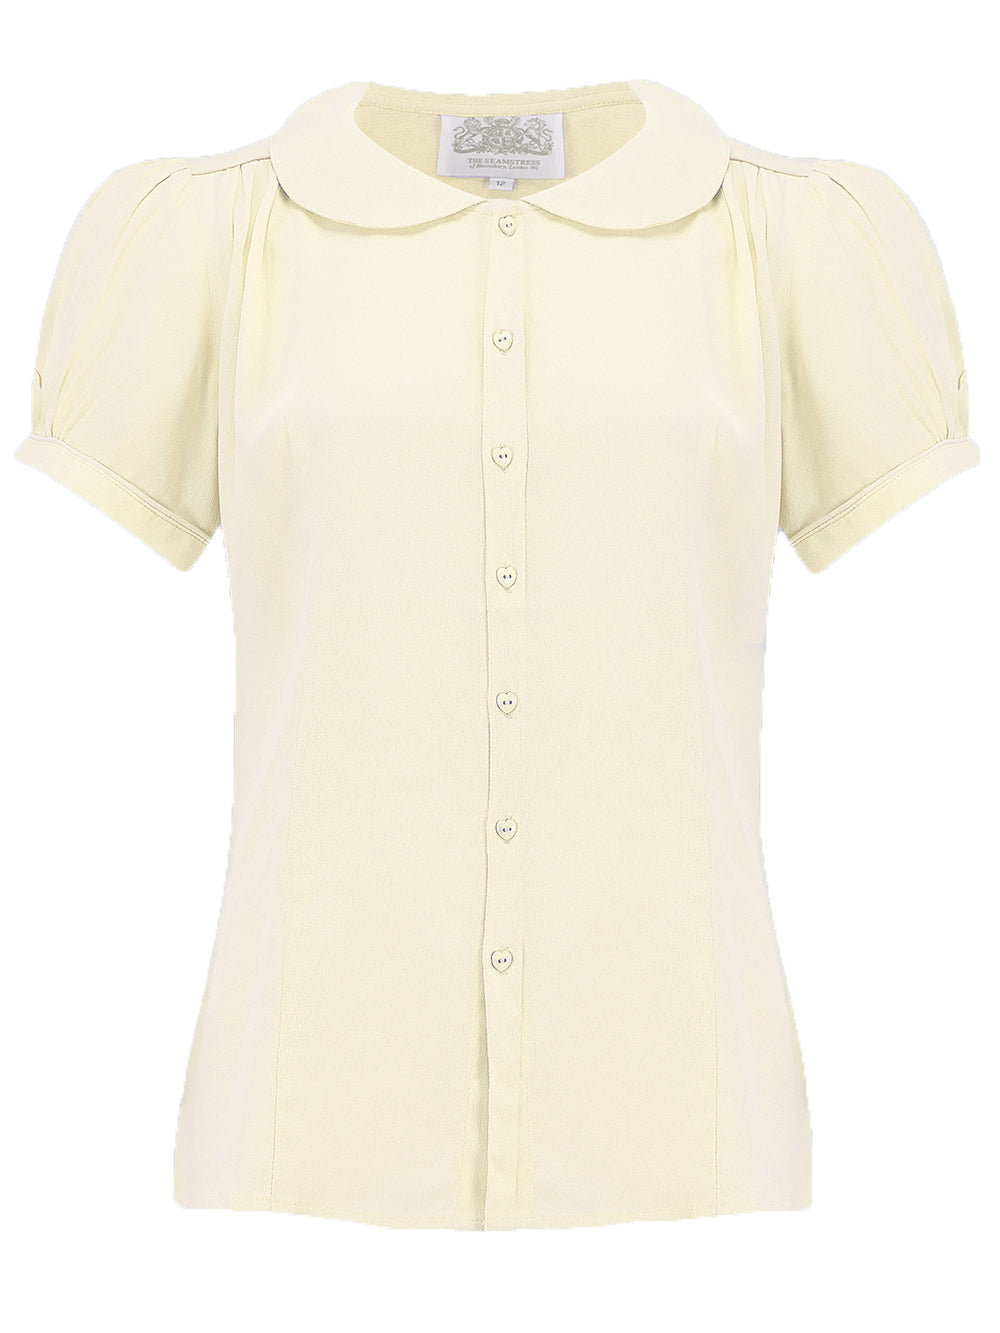 "Jive" Short Sleeve Blouse in Cream, Classic 1940s Vintage Inspired Style - True and authentic vintage style clothing, inspired by the Classic styles of CC41 , WW2 and the fun 1950s RocknRoll era, for everyday wear plus events like Goodwood Revival, Twinwood Festival and Viva Las Vegas Rockabilly Weekend Rock n Romance The Seamstress Of Bloomsbury